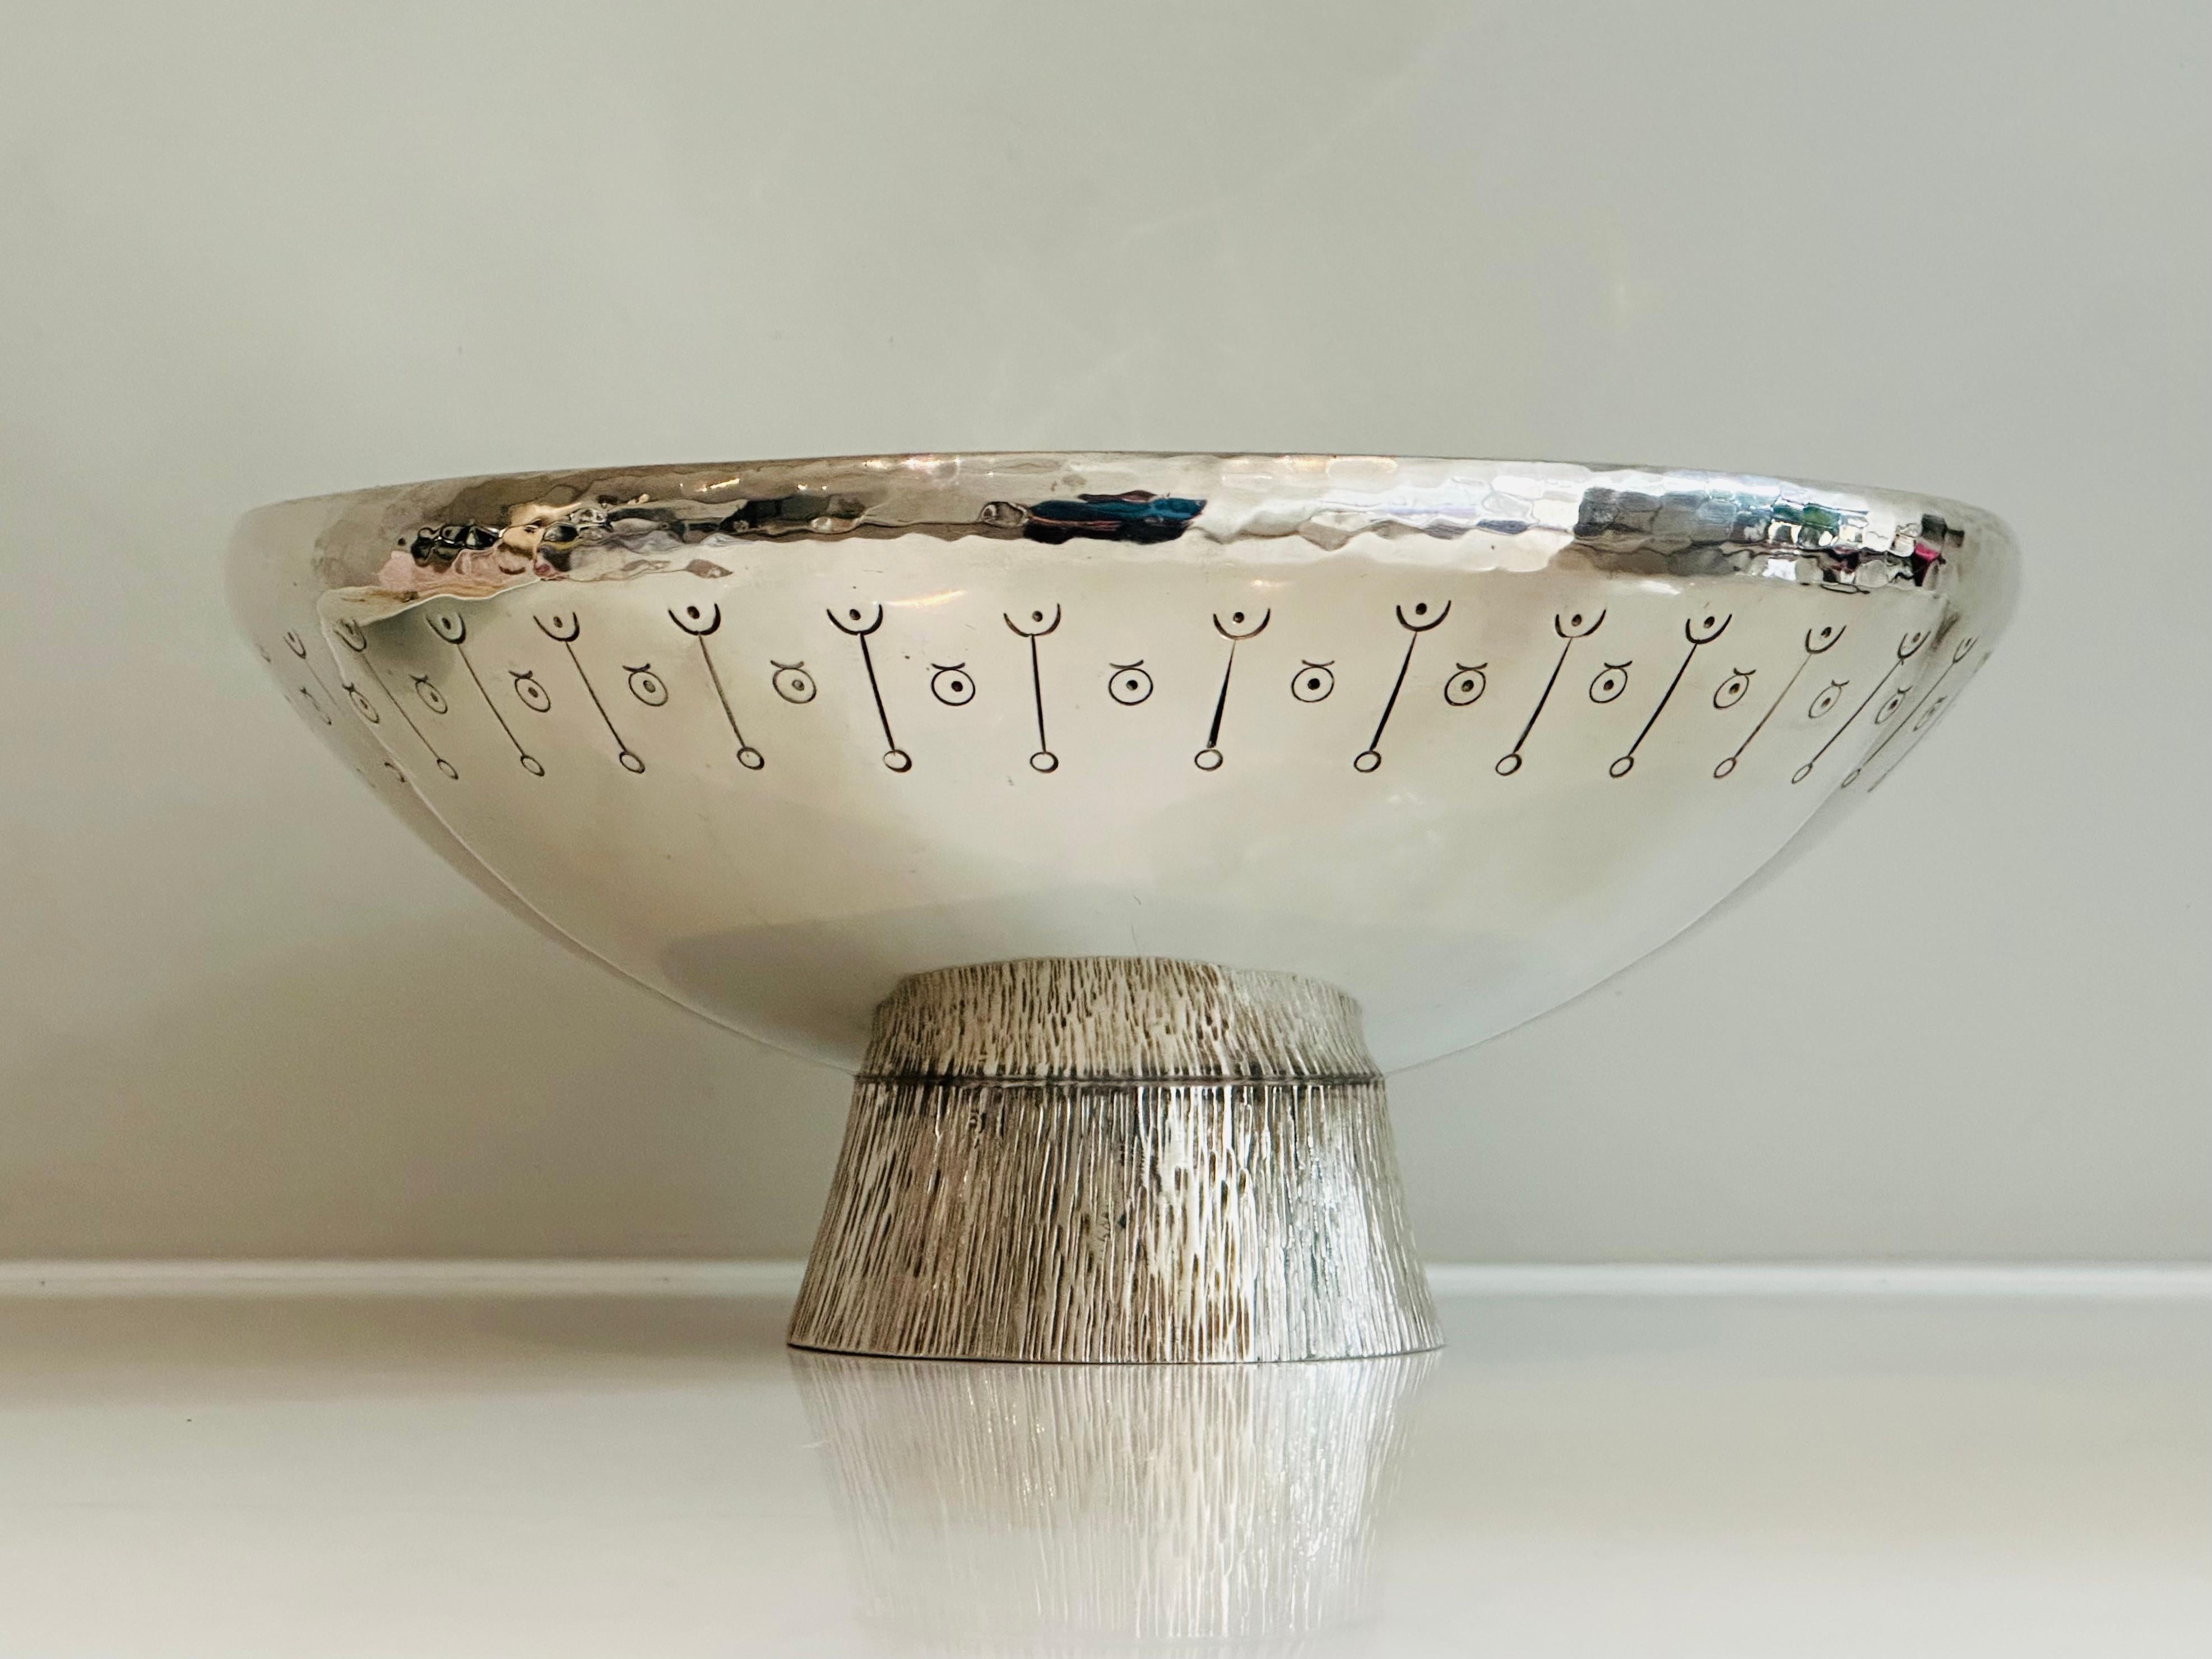 1980s English Silver Plated Decorative Hand-Hammered Serving or Display Bowl For Sale 3